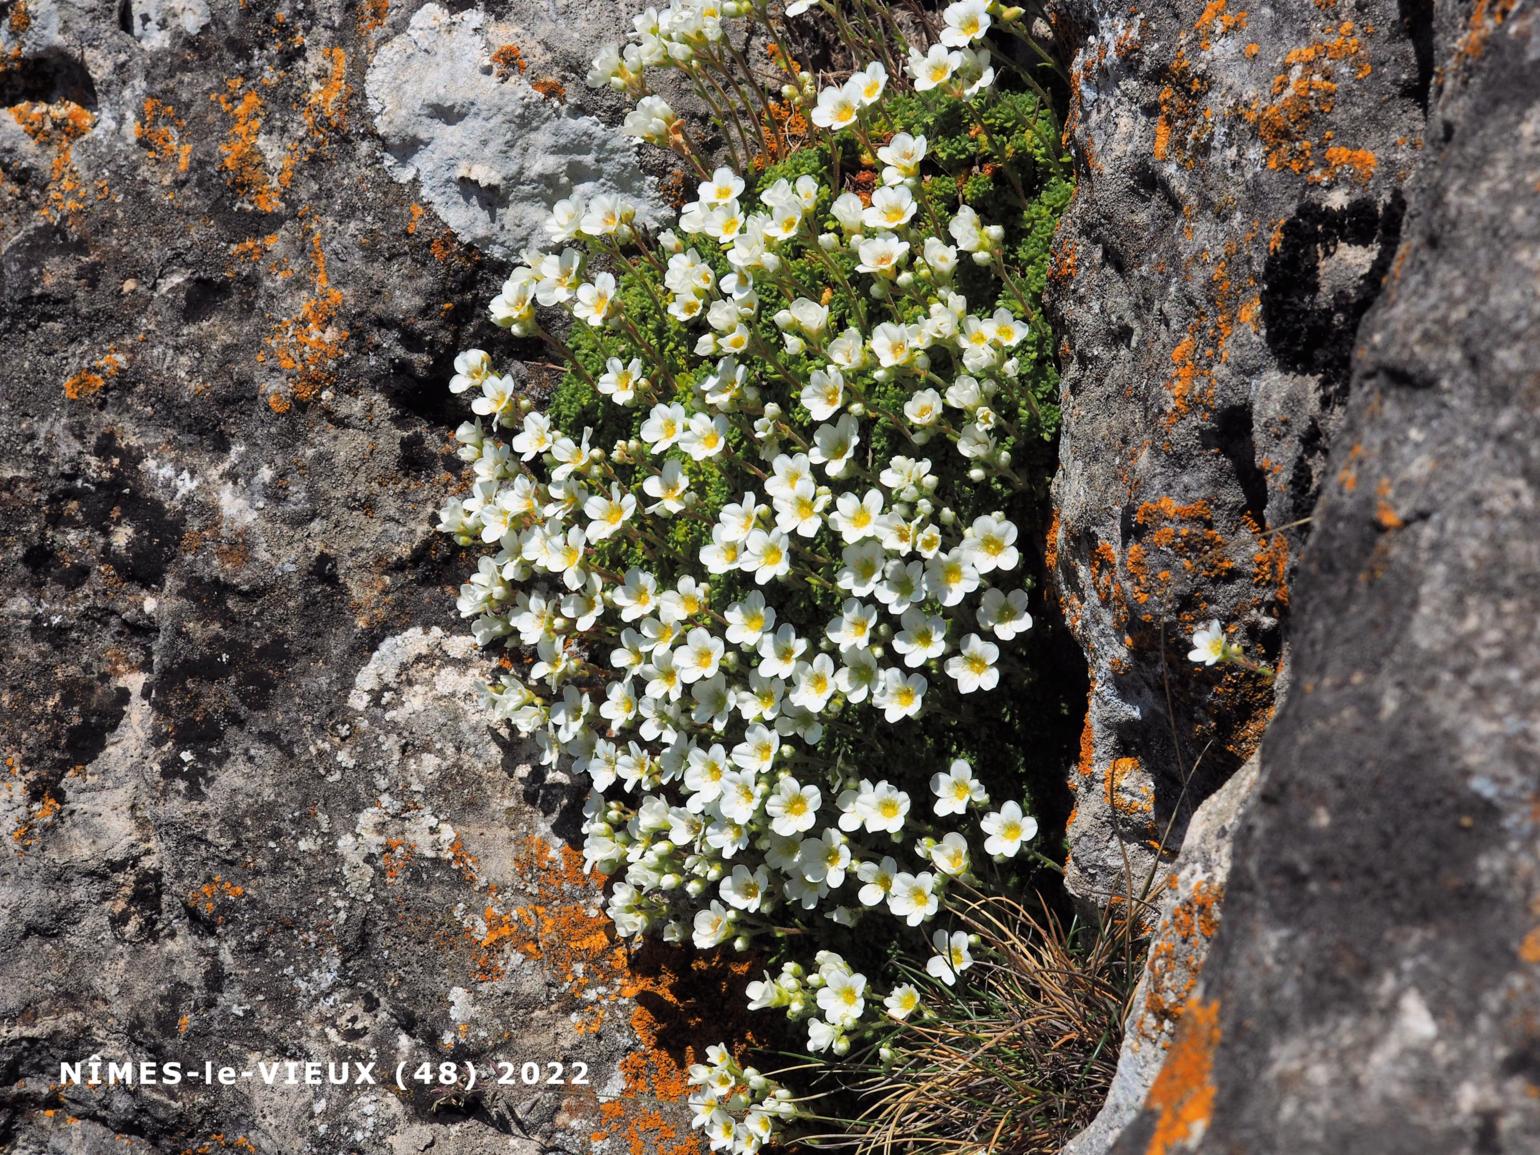 Saxifrage of the Cévennes